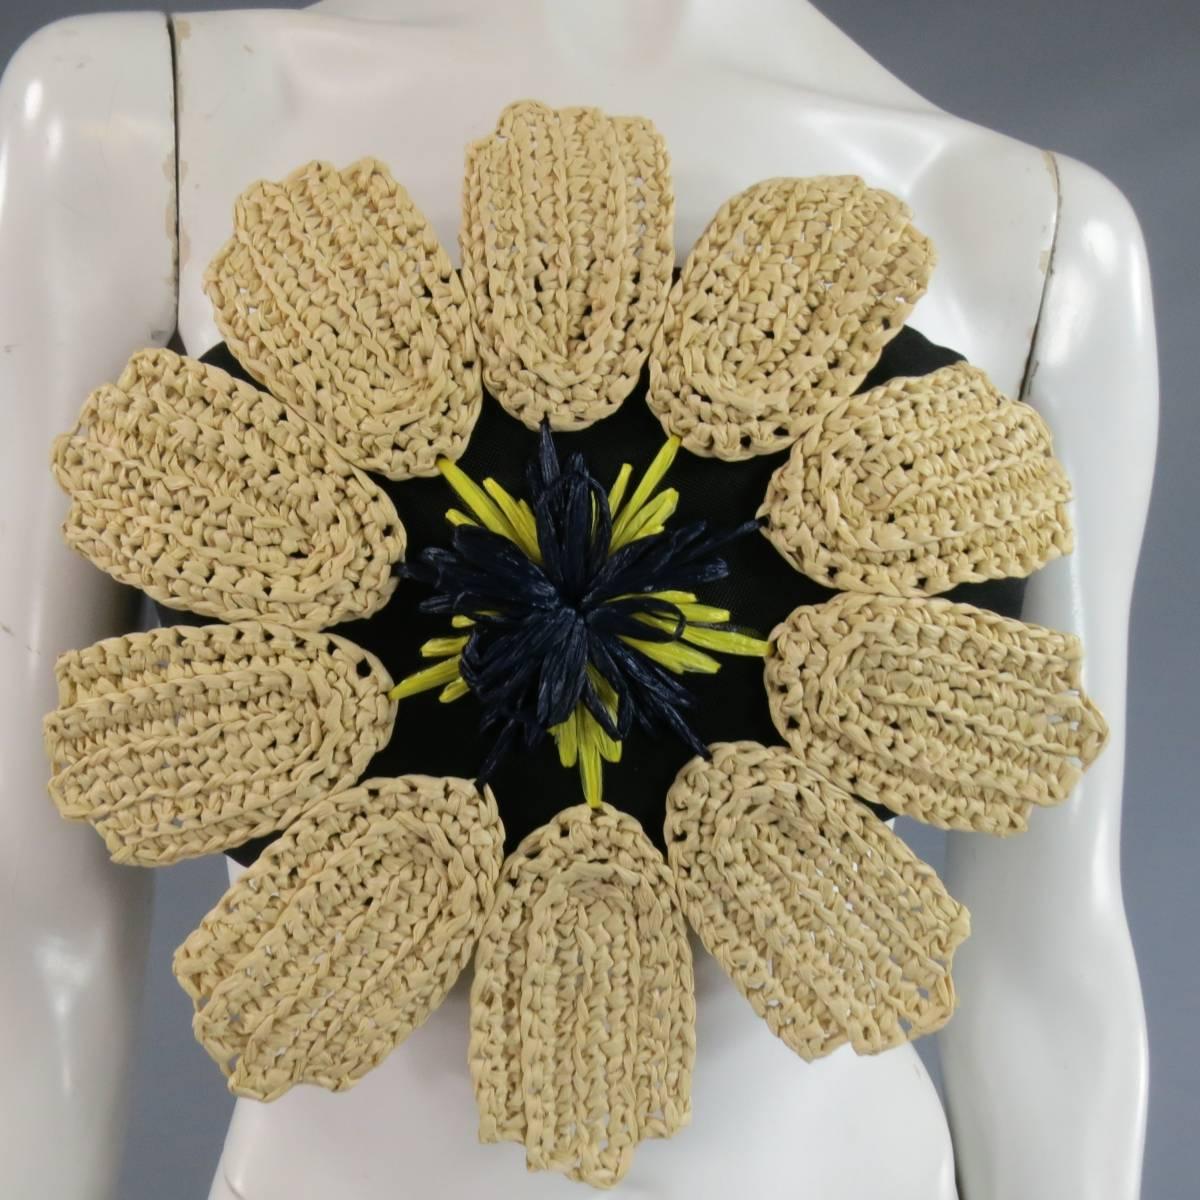 This fabulous DELPOZO bustier top comes in a structured black fabric and features an oversized beige straw flower with navy & yellow straw center. Made in Spain.
Retails at $1500.00.
 
Excellent Pre-Owned Condition.
Marked: US 4
